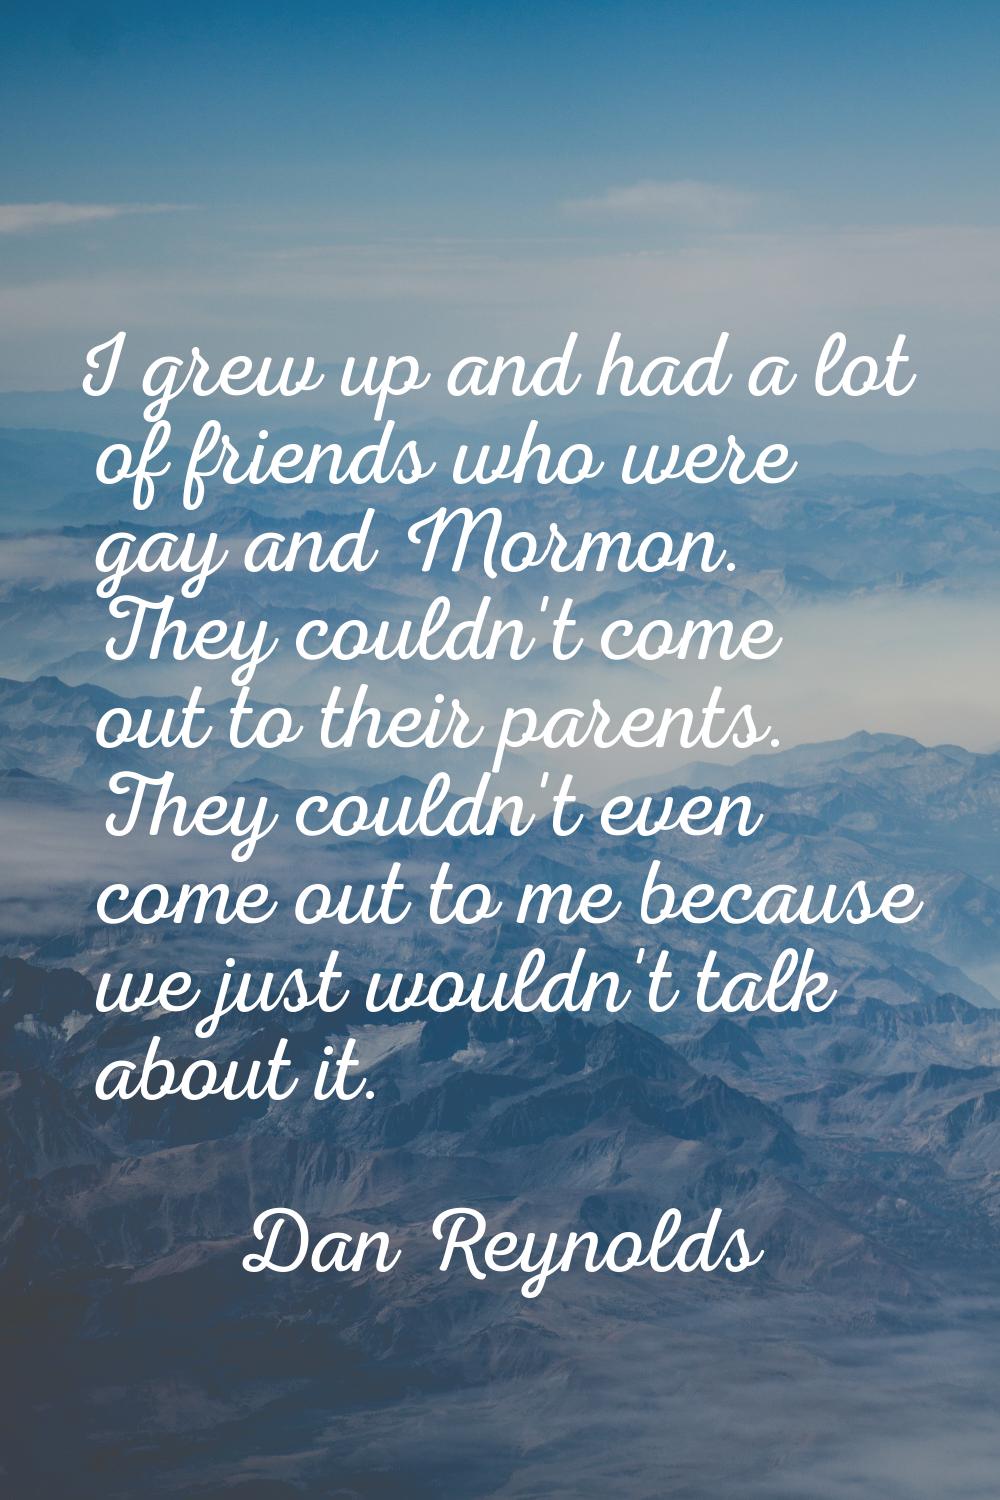 I grew up and had a lot of friends who were gay and Mormon. They couldn't come out to their parents